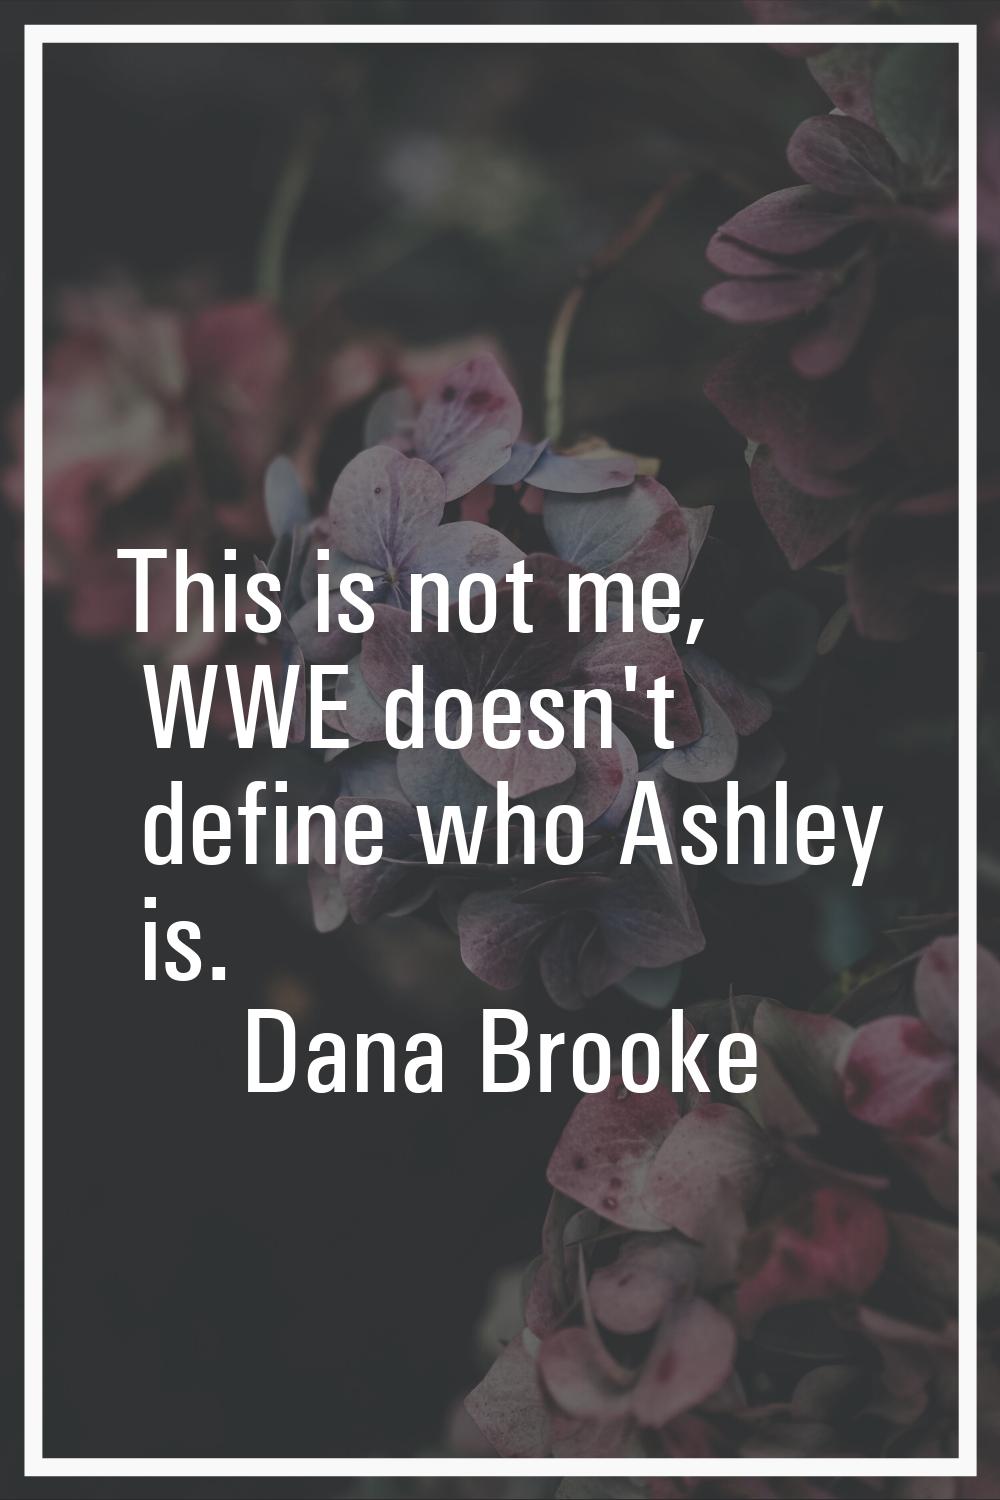 This is not me, WWE doesn't define who Ashley is.